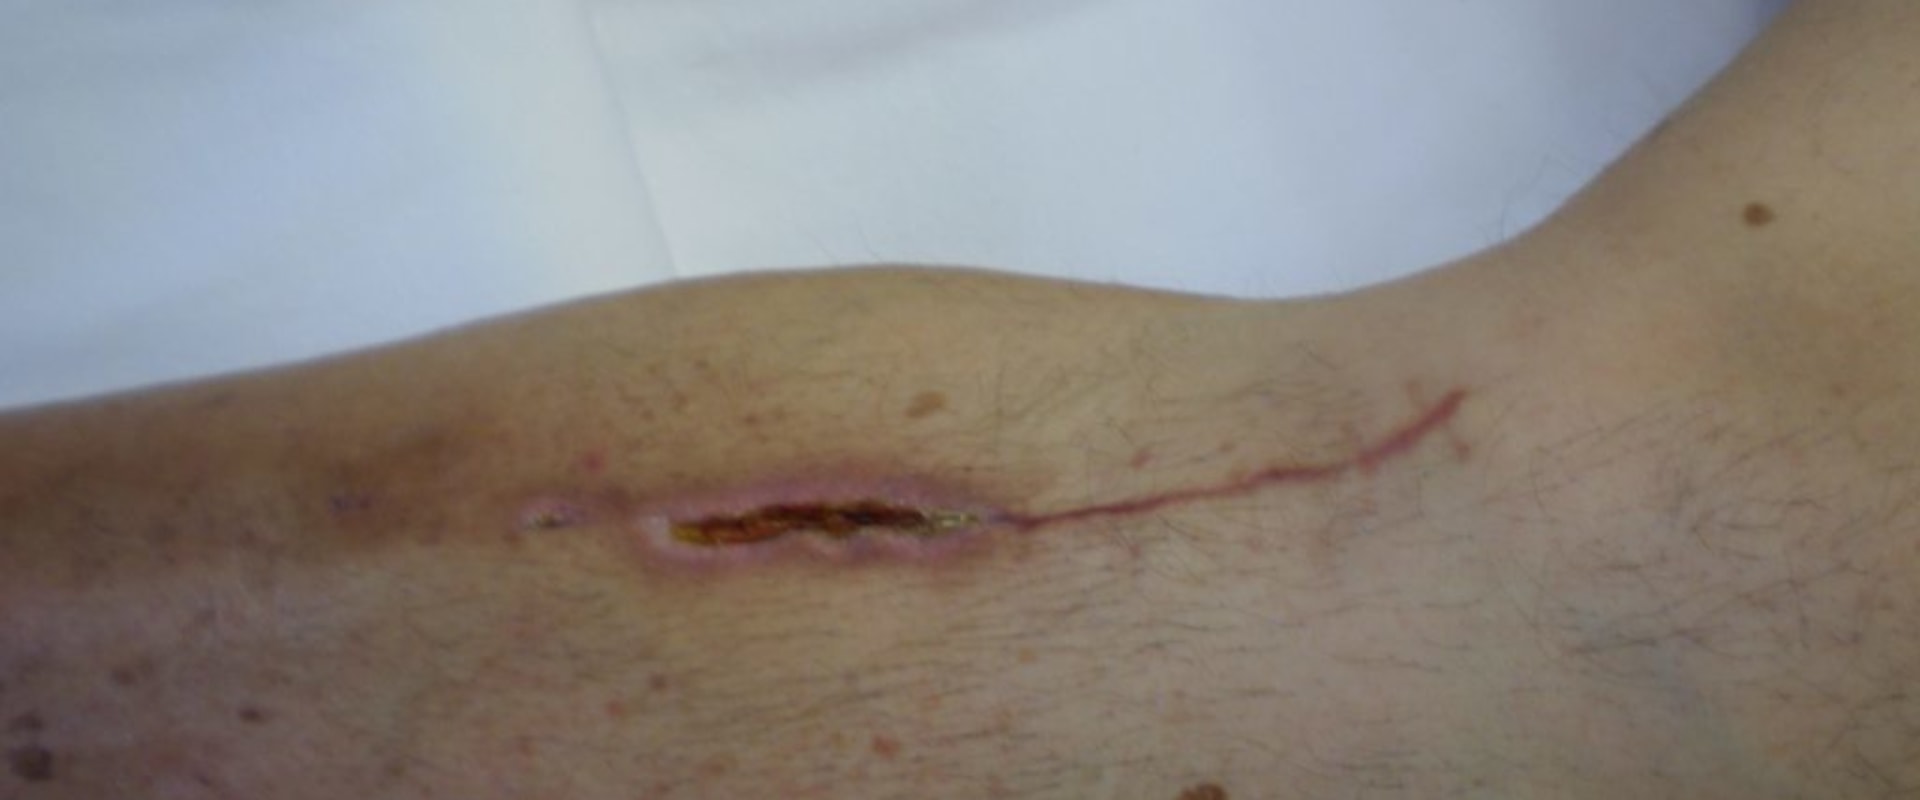 The Power of a Comprehensive Wound Assessment